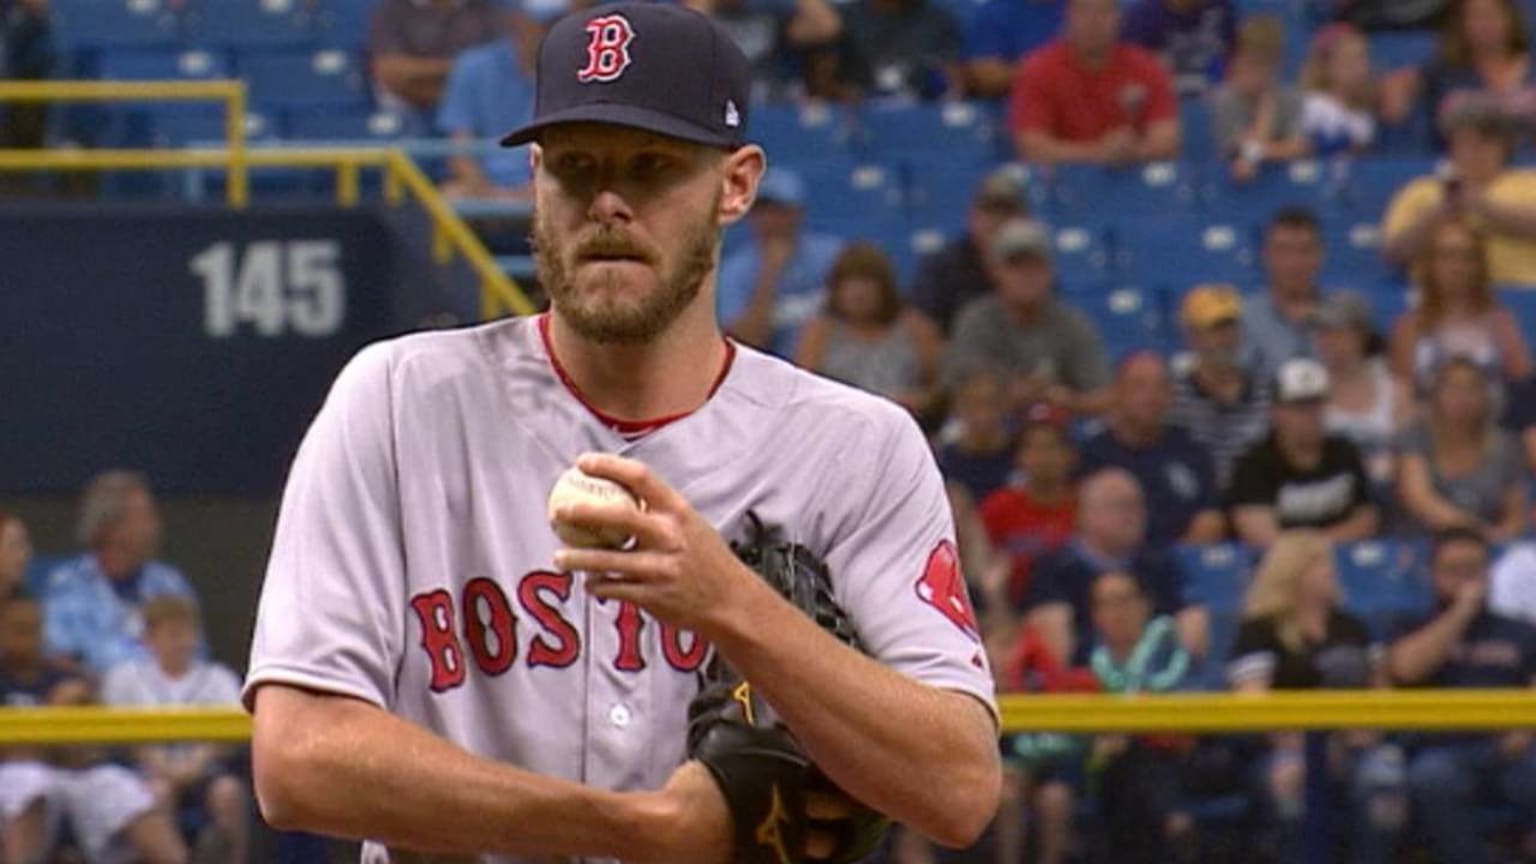 Red Sox pitcher CHRIS SALE plays important role as relief pitcher - Gold  Medal Impressions